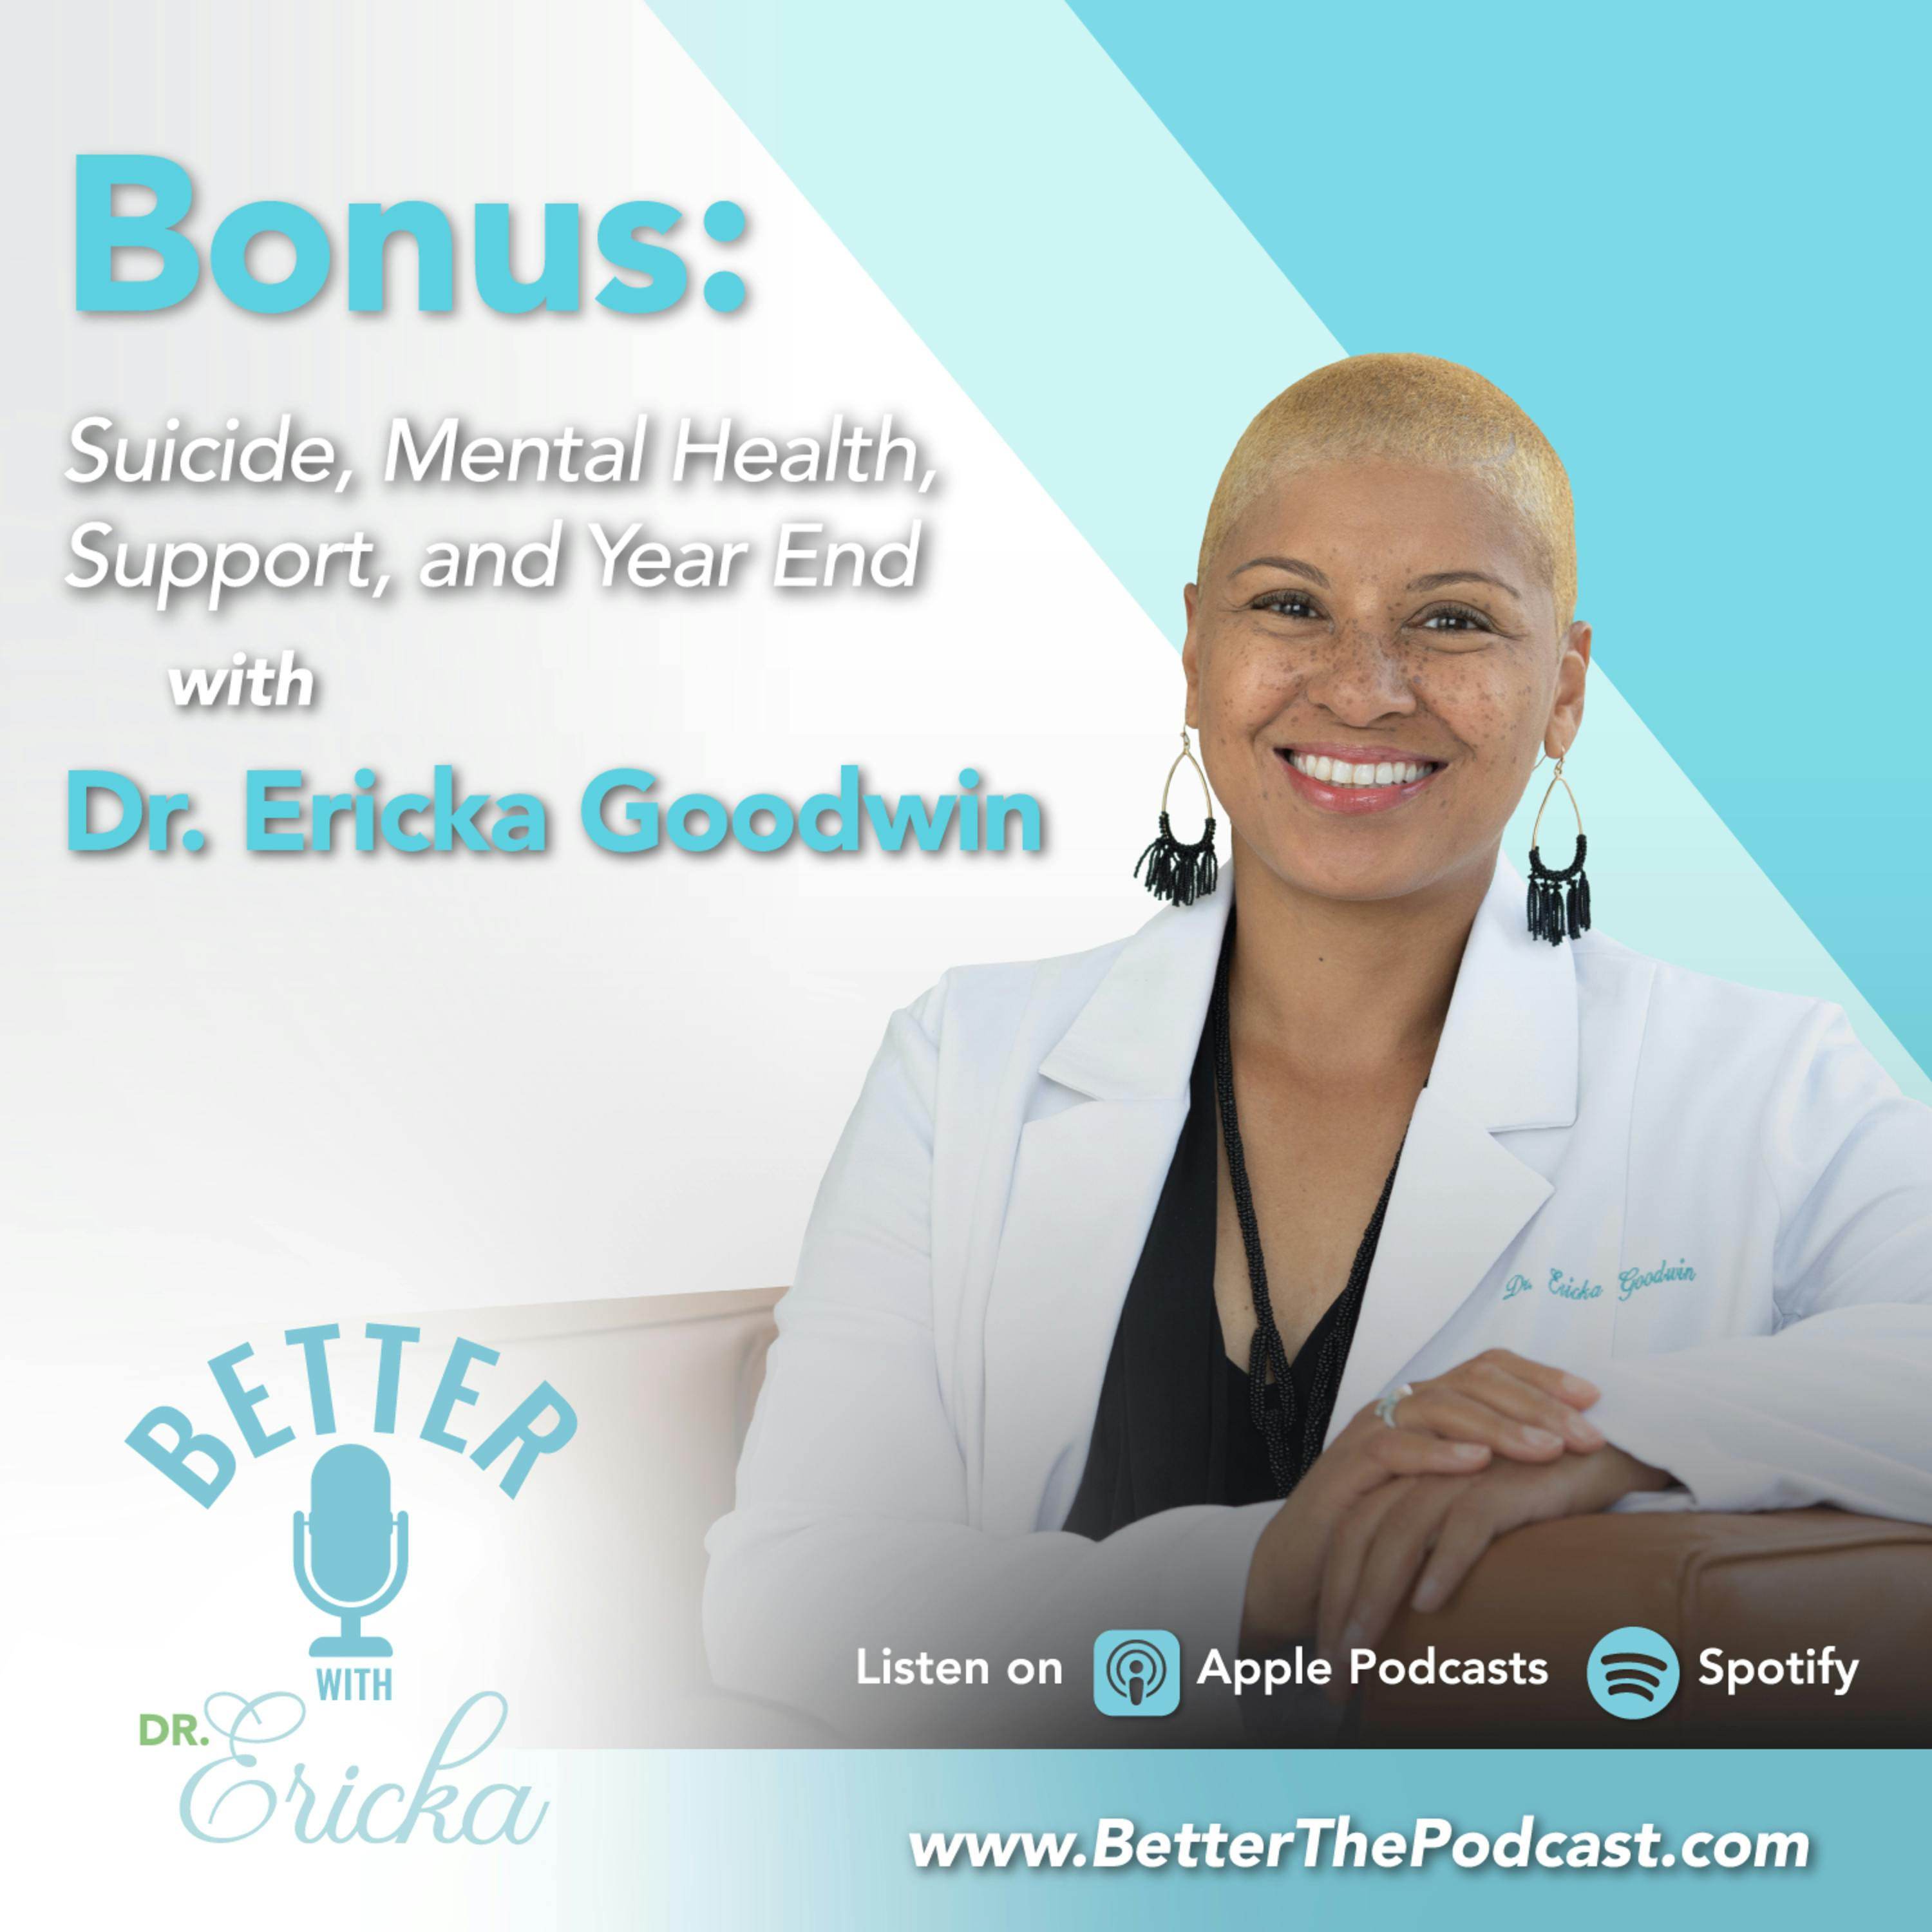 Suicide, Mental Health, Support, and Year End with Dr. Ericka Goodwin